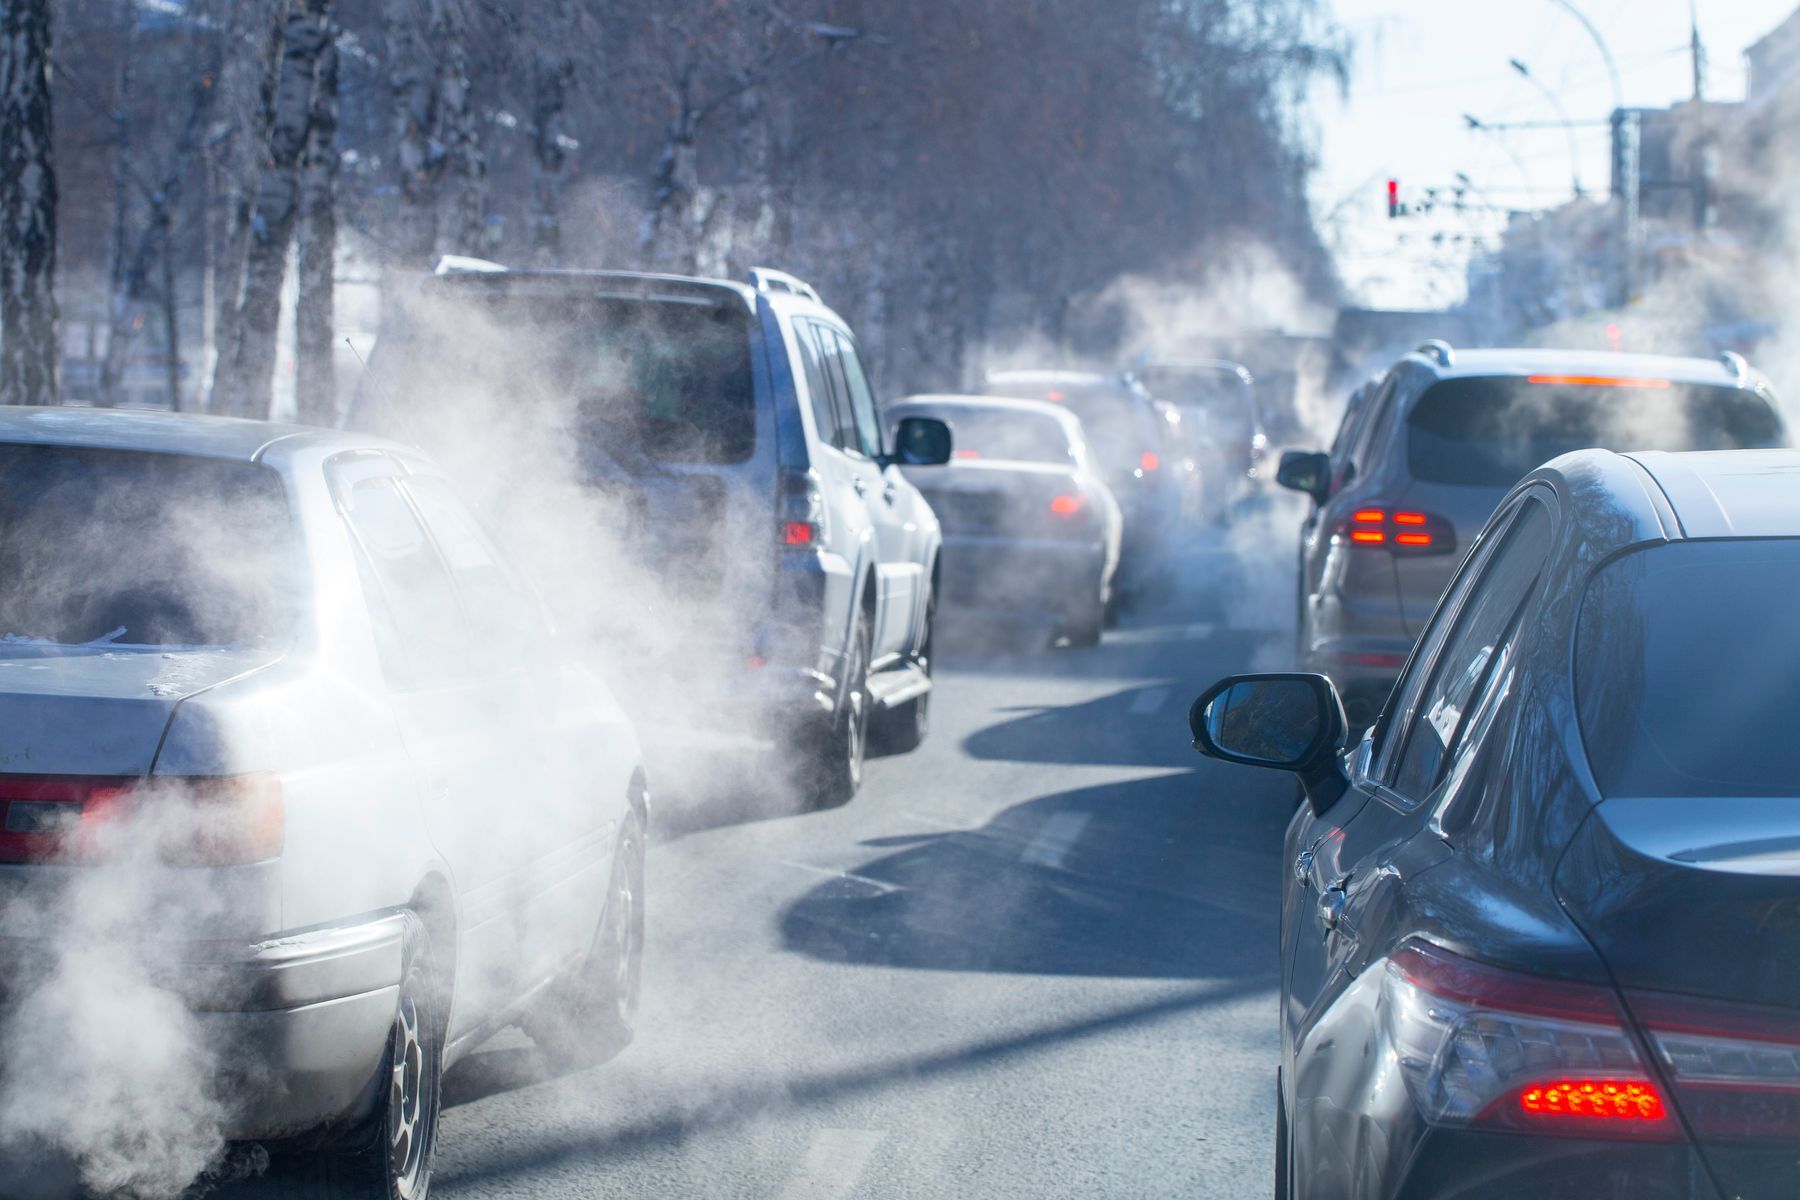 <p>Pollution caused by driving a car (<a href="https://www.bbc.com/news/science-environment-49349566">about 170 g of CO<sub>2</sub> per kilometre, per passenger</a> and even more when a <a href="https://www.nrcan.gc.ca/energy/efficiency/communities-infrastructure/transportation/cars-light-trucks/idling/4415?_gl=1*lsvyx7*_ga*ODE4NjkyODg0LjE2Njg0NTY5MTg.*_ga_C2N57Y7DX5*MTY2ODQ2MjMxNS4yLjEuMTY2ODQ2MjQ3MC4wLjAuMA..">vehicle is stopped in traffic</a>) might make you think that <a href="https://hbr.org/2022/03/is-remote-work-actually-better-for-the-environment">telecommuting</a> would substantially reduce our carbon footprint. However, the accompanying increase in the use of digital communication tools also comes with an ecological footprint (one minute of <a href="https://news.mit.edu/2021/how-to-reduce-environmental-impact-next-virtual-meeting-0304">videoconferencing</a> is equivalent to about 16 g of CO<sub>2</sub>, for example). So, make sure you compare your travel (mode of transportation, time of day, duration of the trip, etc.) to your <a href="https://plana.earth/academy/how-to-measure-carbon-footprint-work-from-home">technology use</a>.</p>